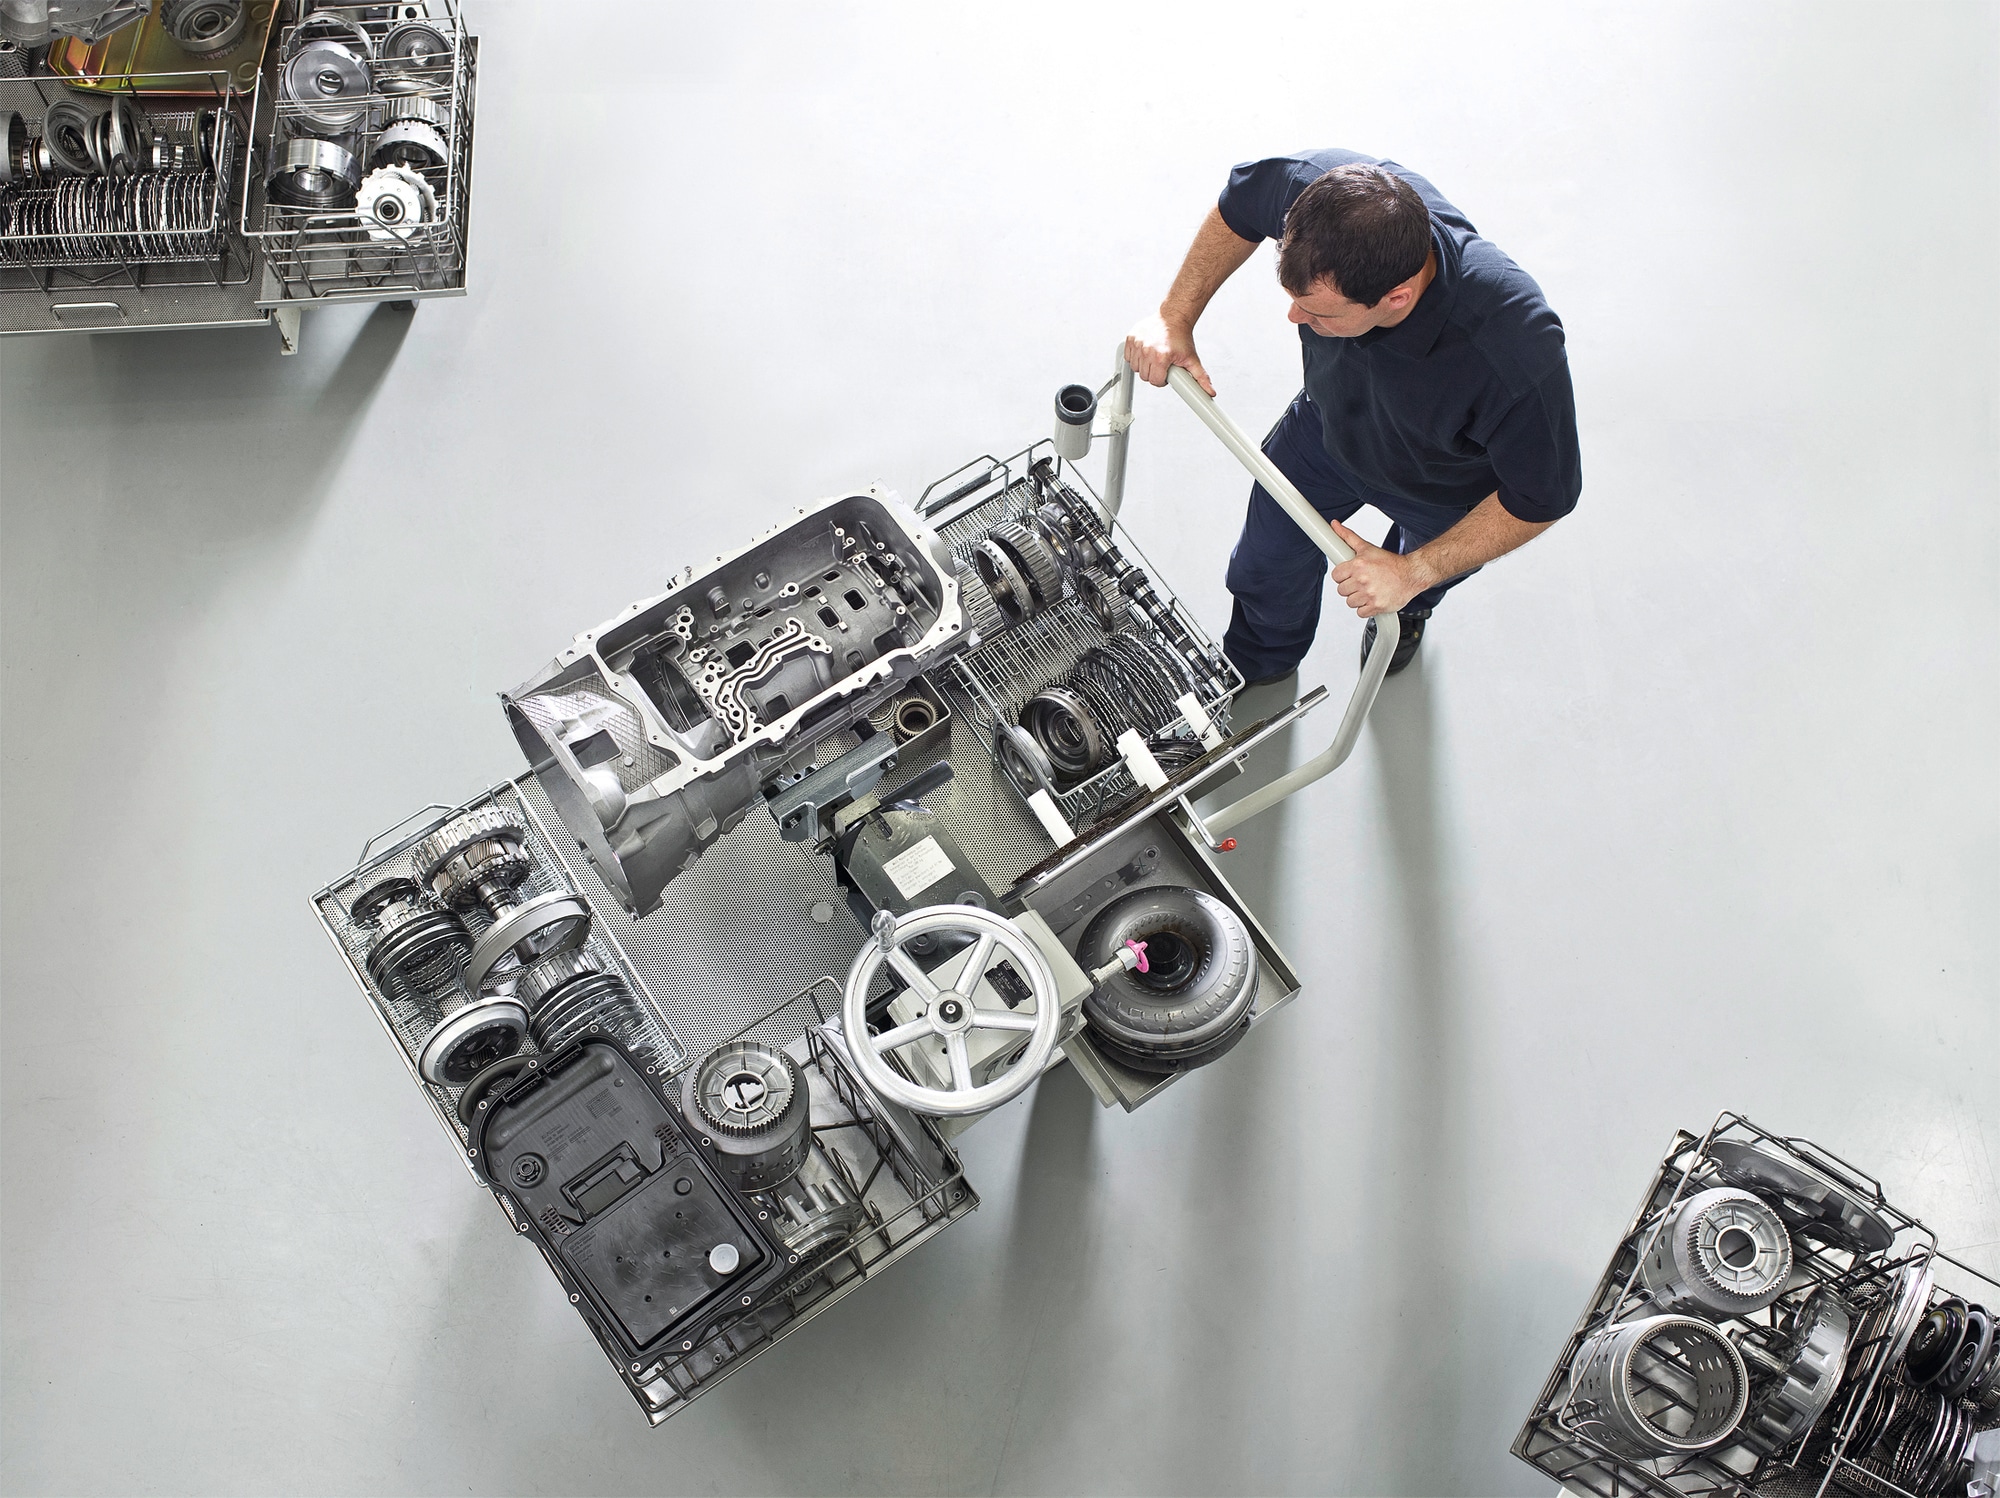 ZF remanufacturing supports sustainability and cuts CO2 production